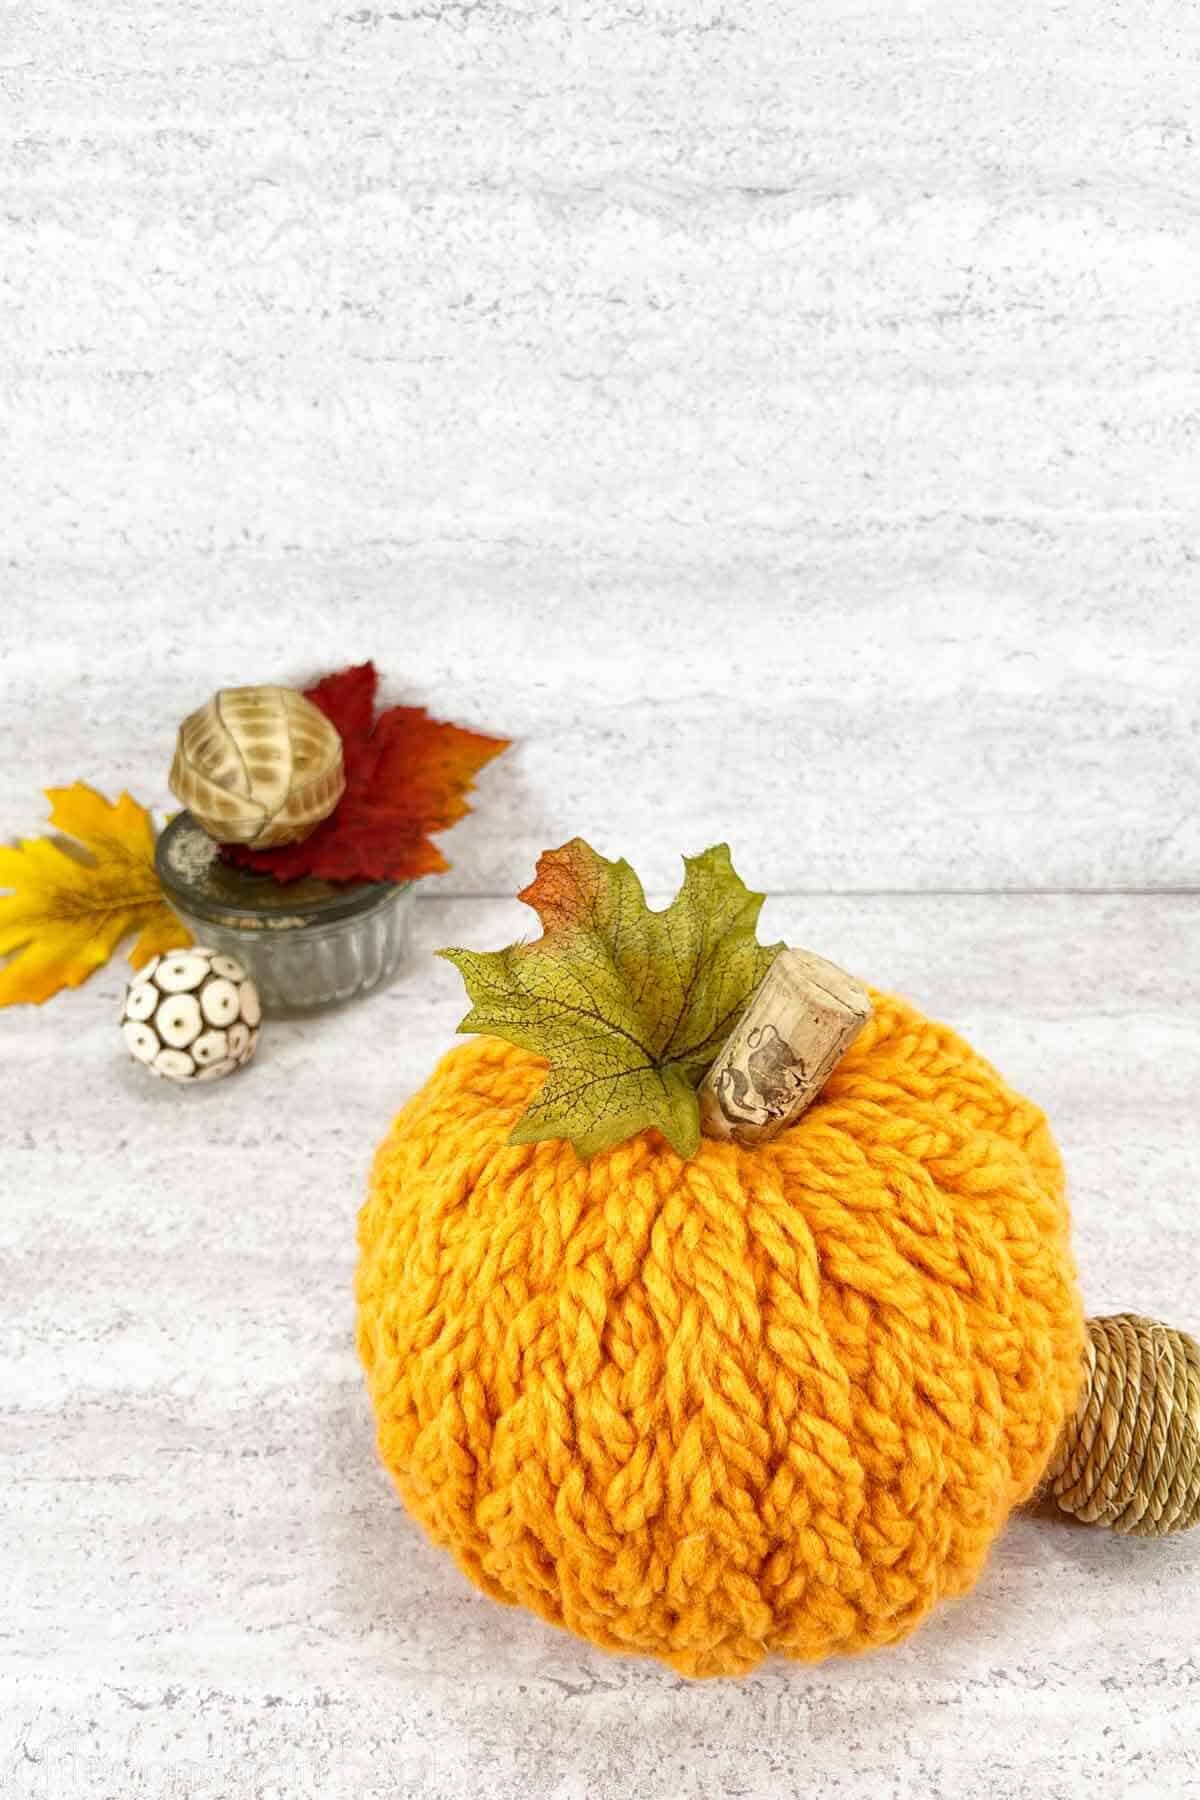 Vertical image of an orange sweater pumpkin made with yarn, fall leaves, and a wine cork against a concrete background.